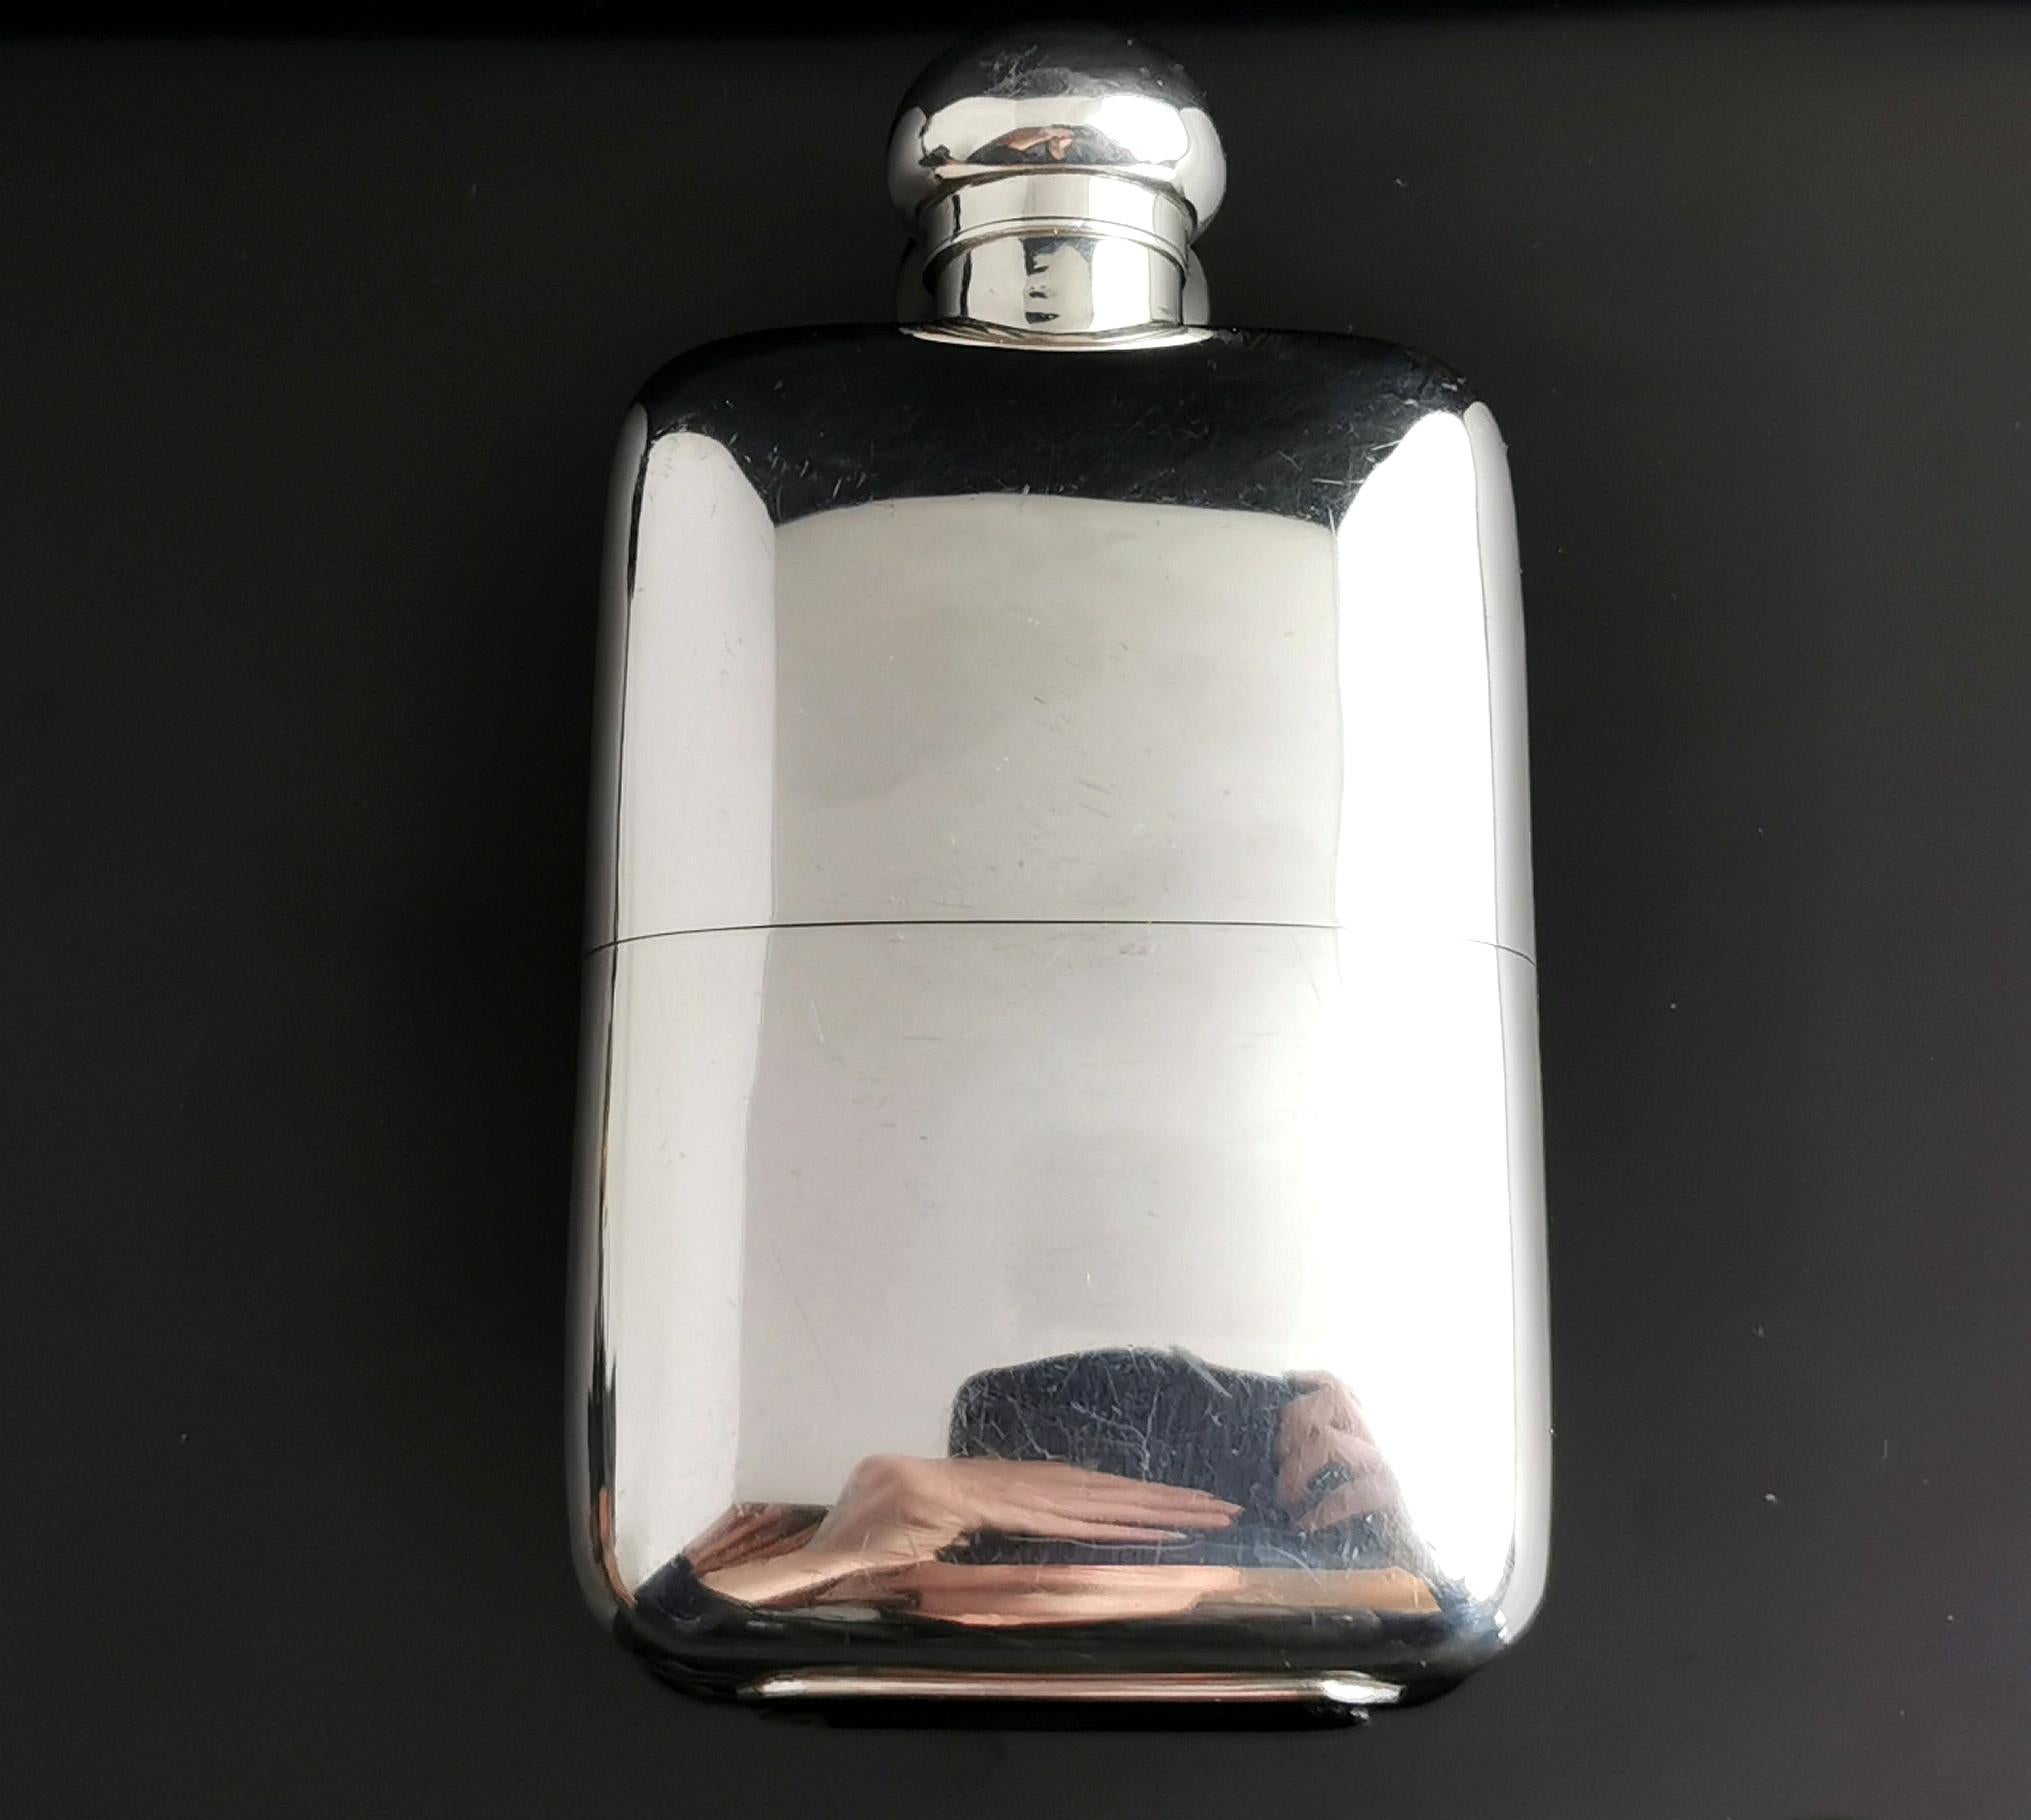 A handsome antique, early Art Deco sterling silver hip flask.

It has a smooth polished design with rounded corners, a curved ergonomic shaped body and screw bayonet cap.

The hip flask has a removable gilt lined sterling silver beaker designed to